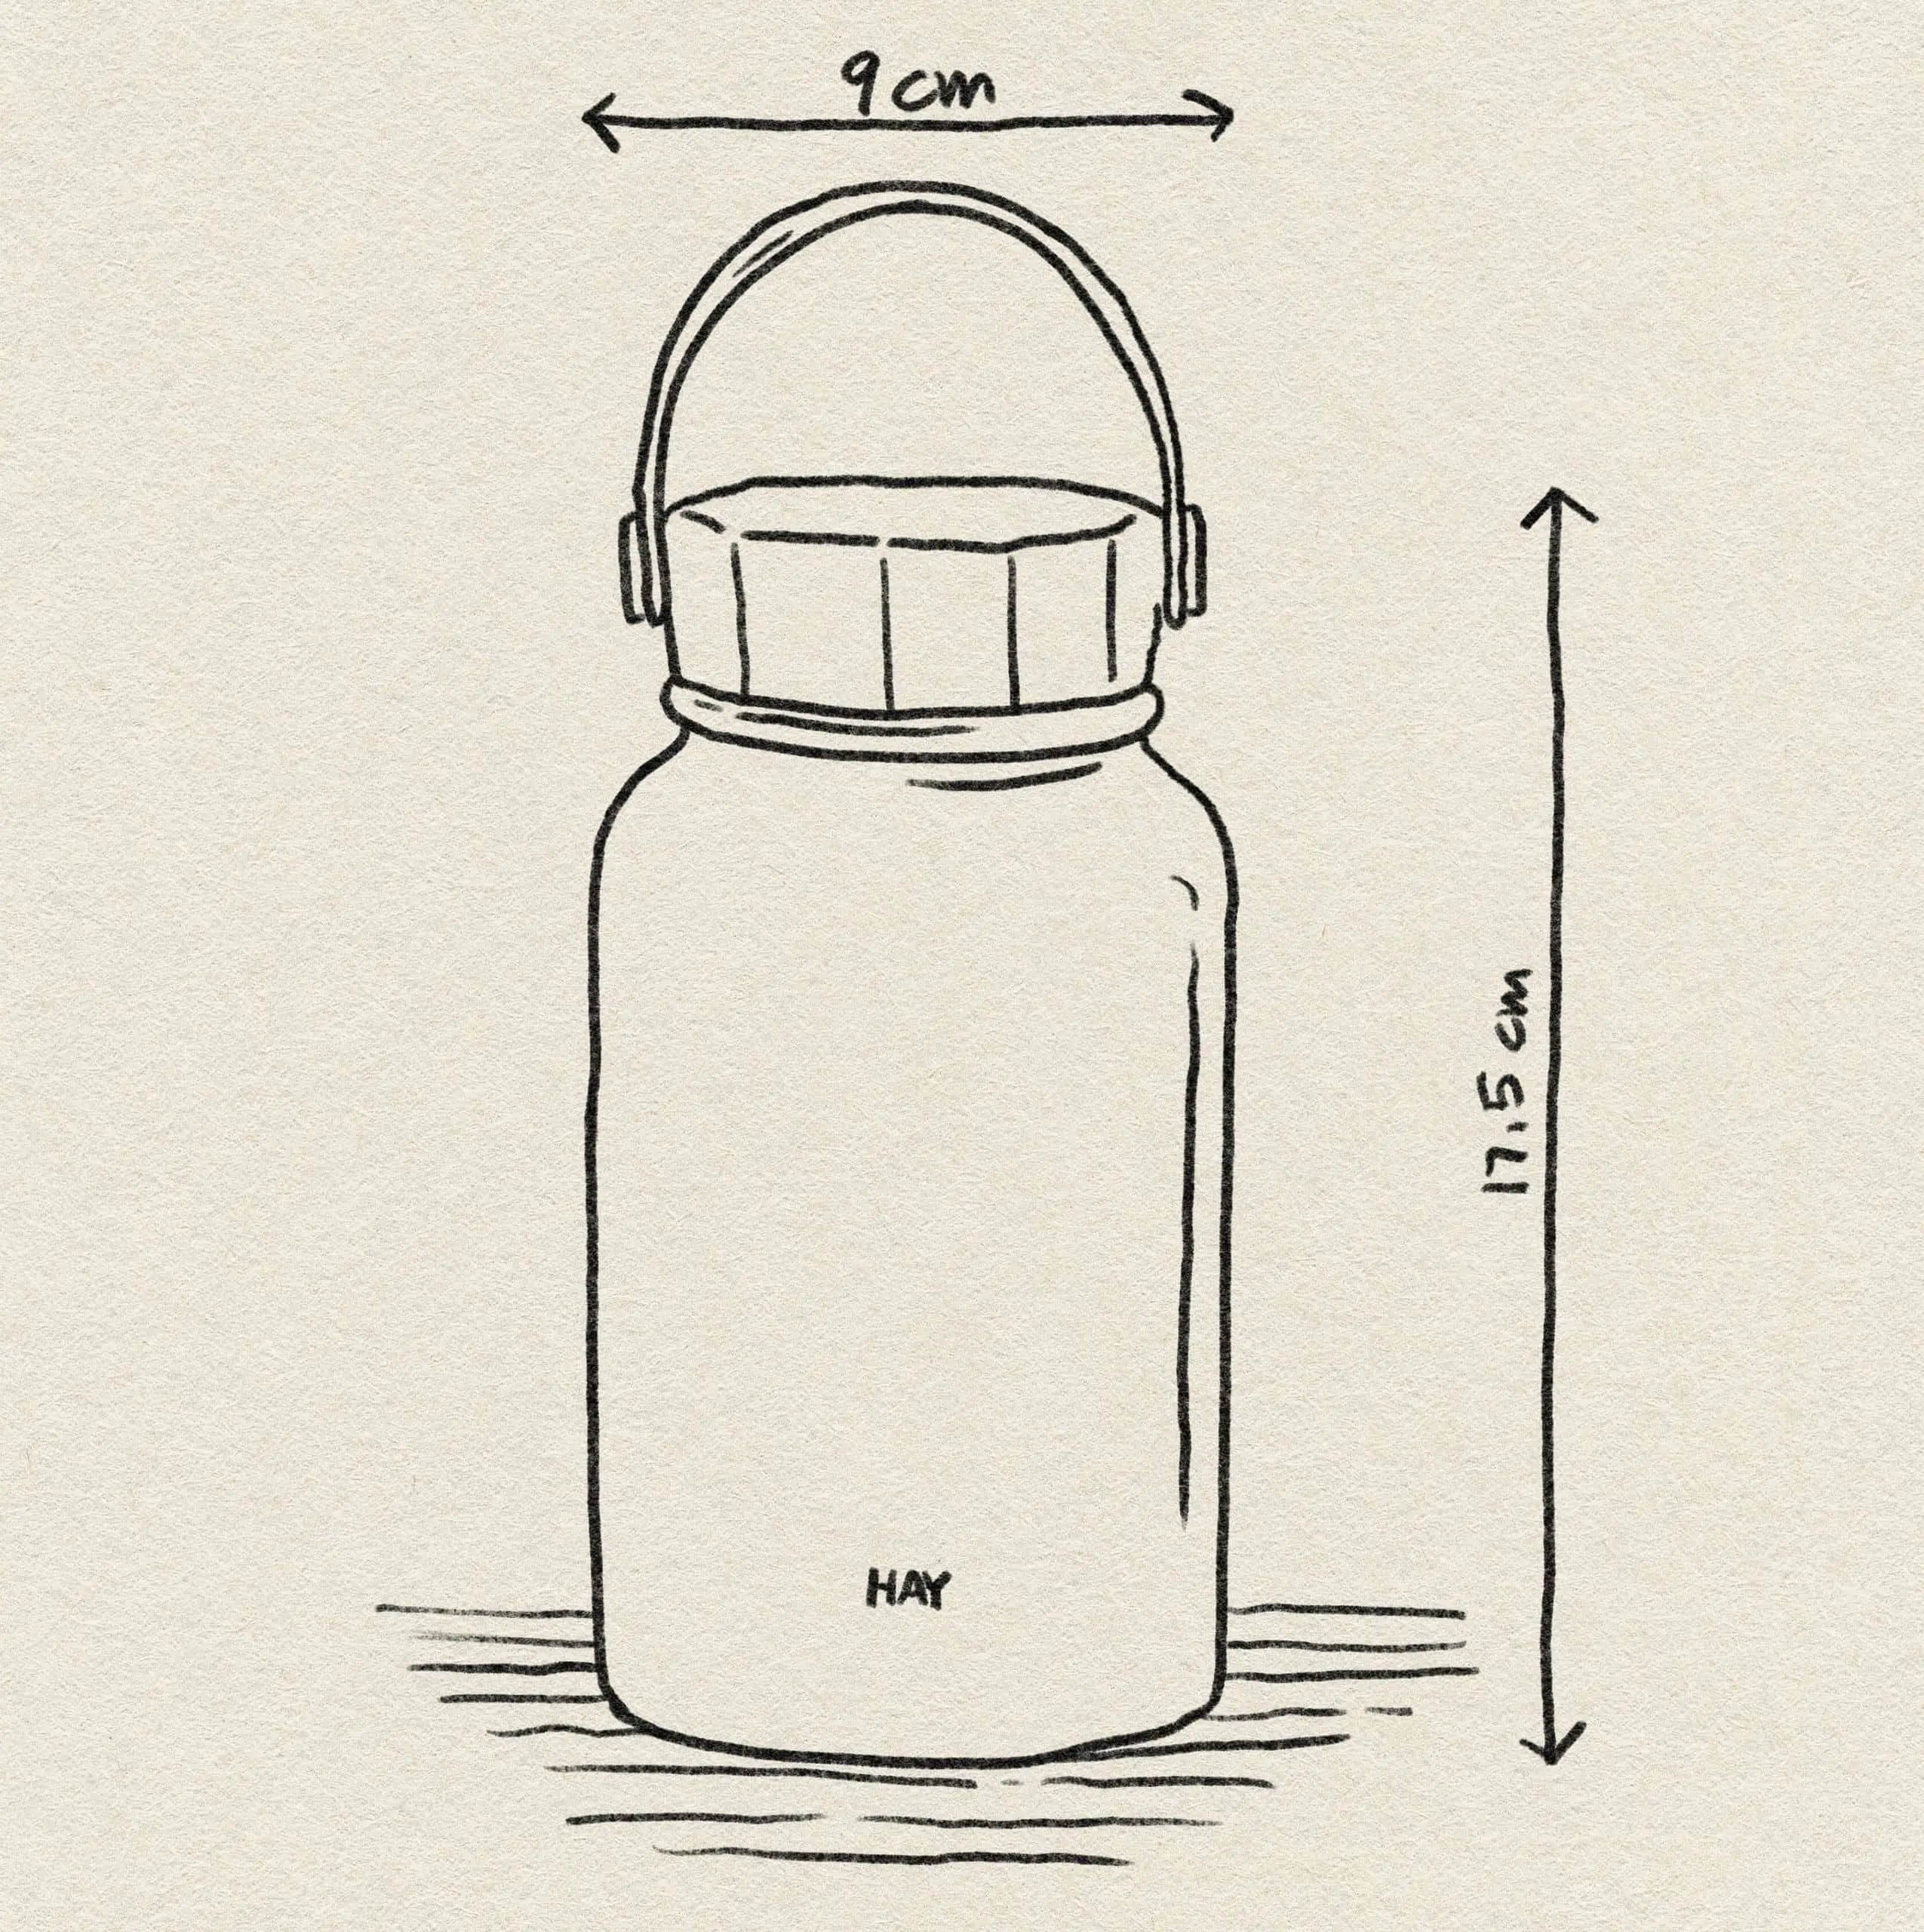 Hay - Mono Thermo container